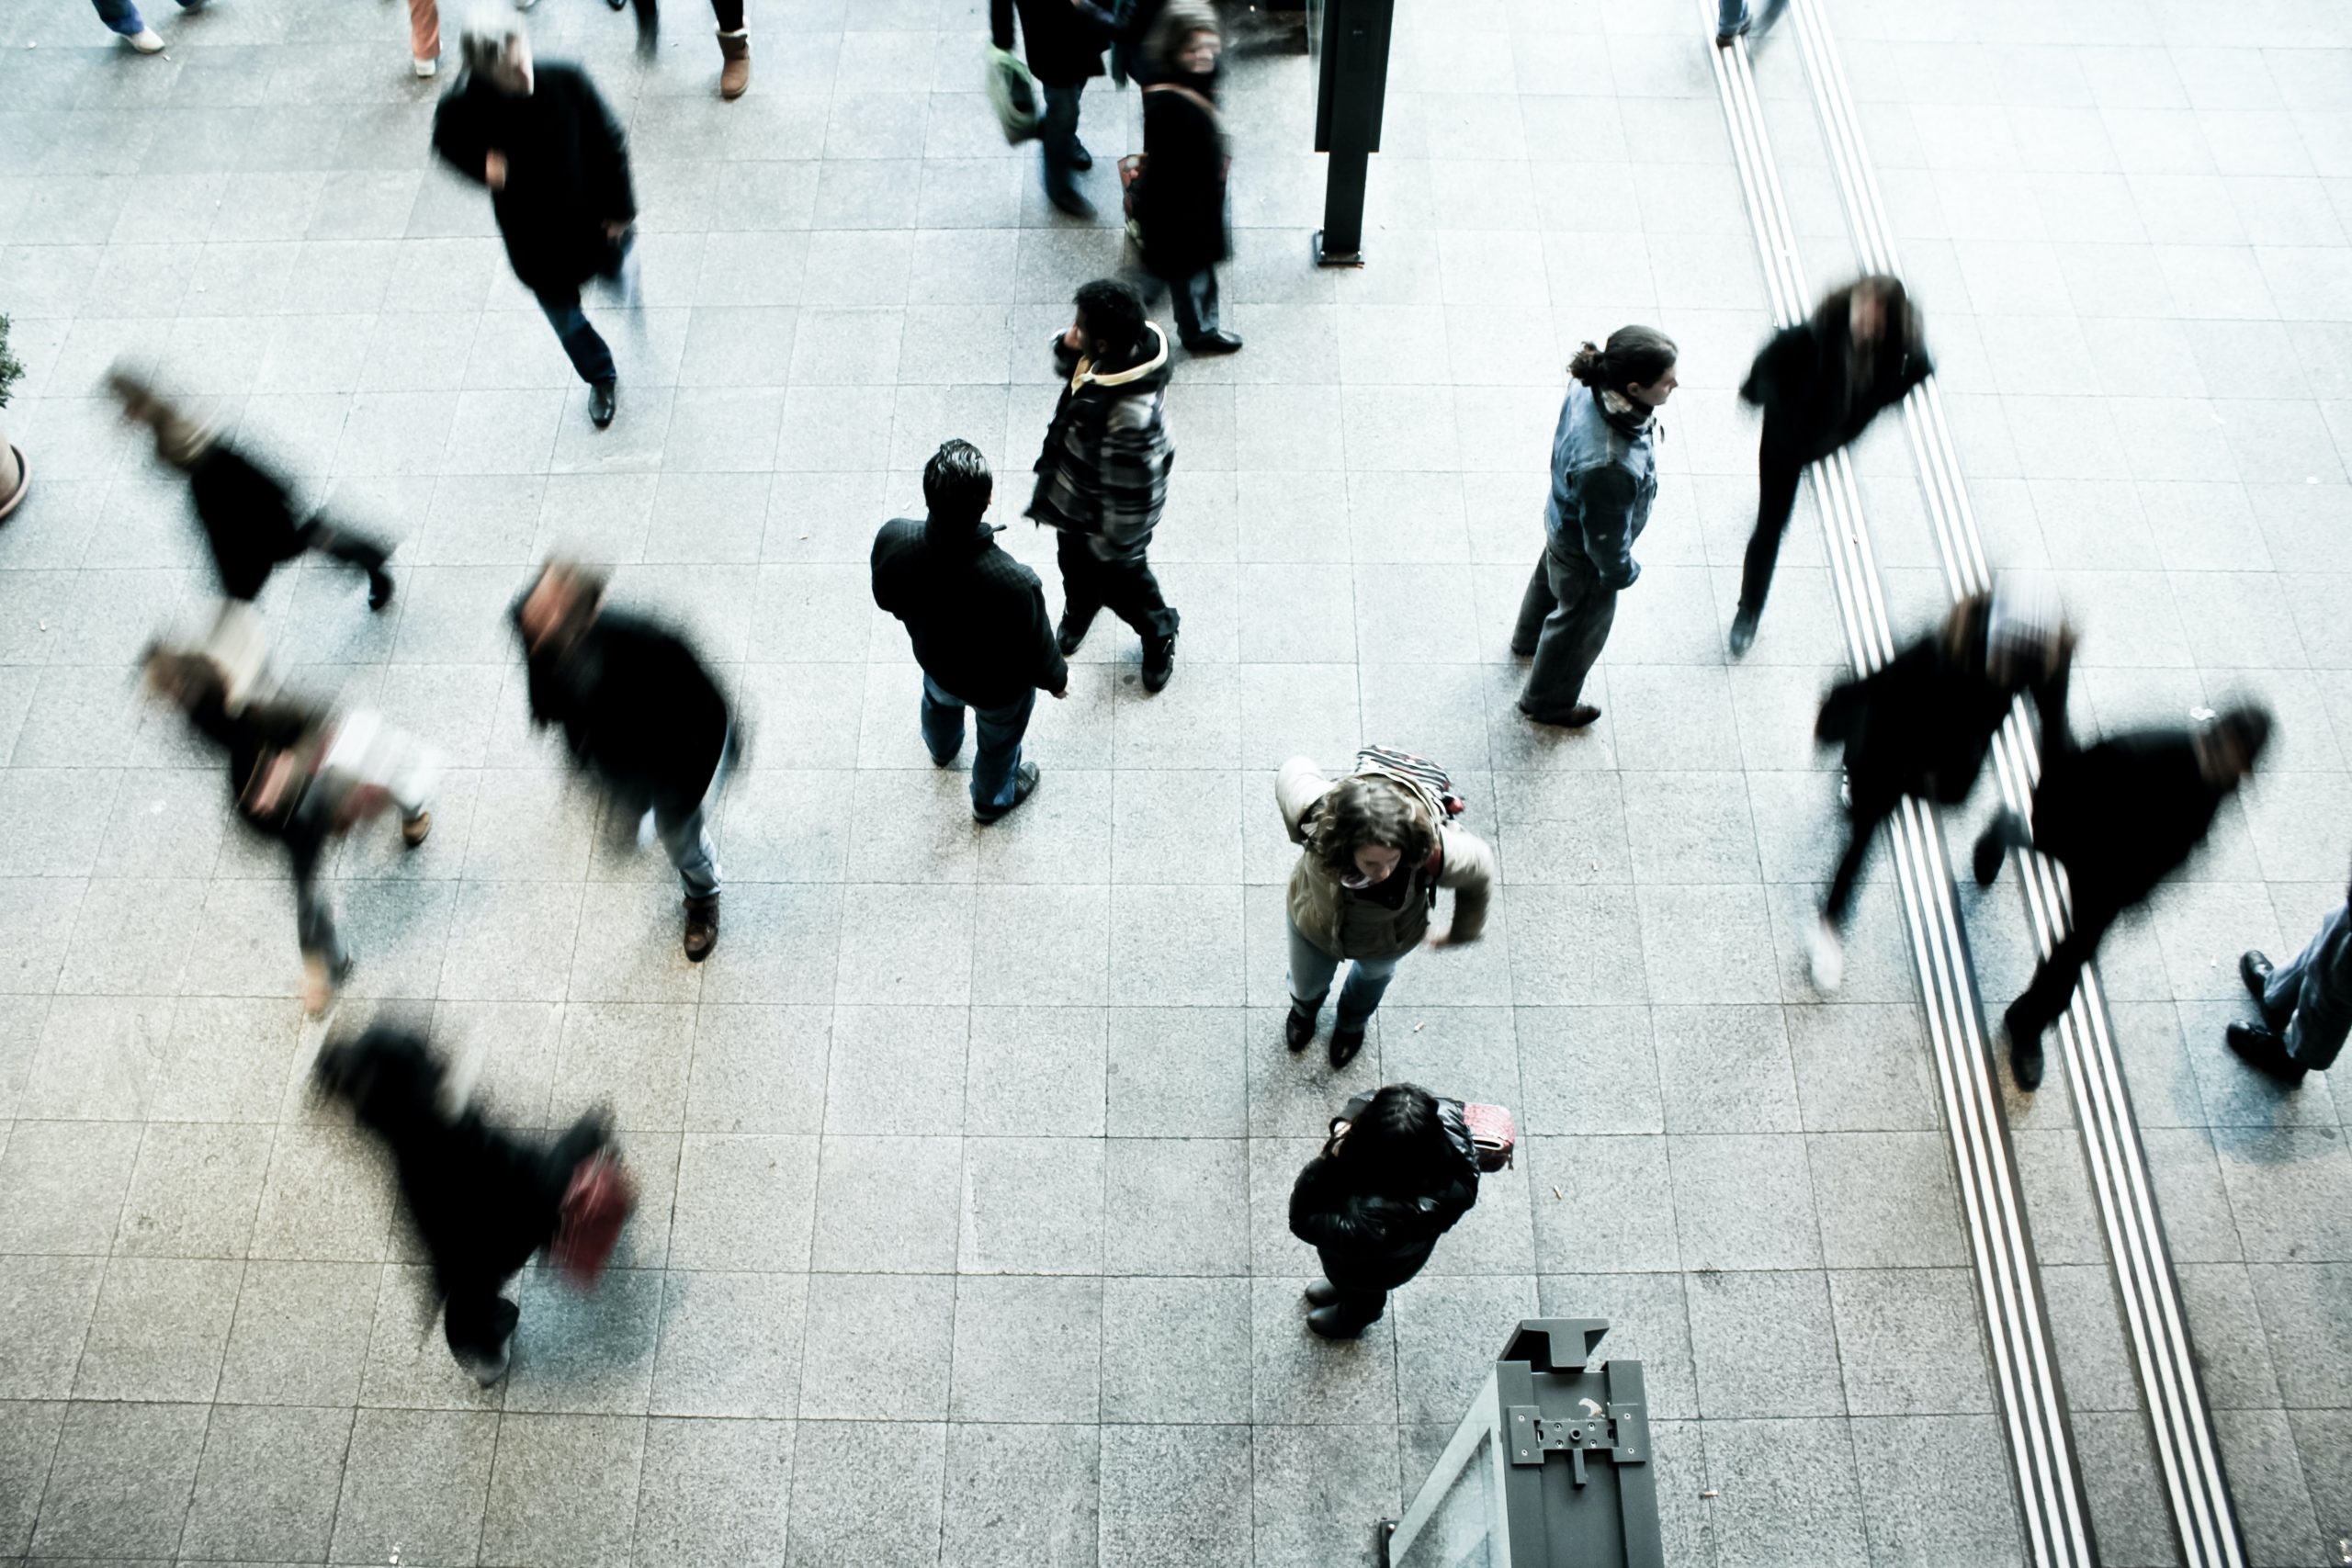 People walk through a crowded area